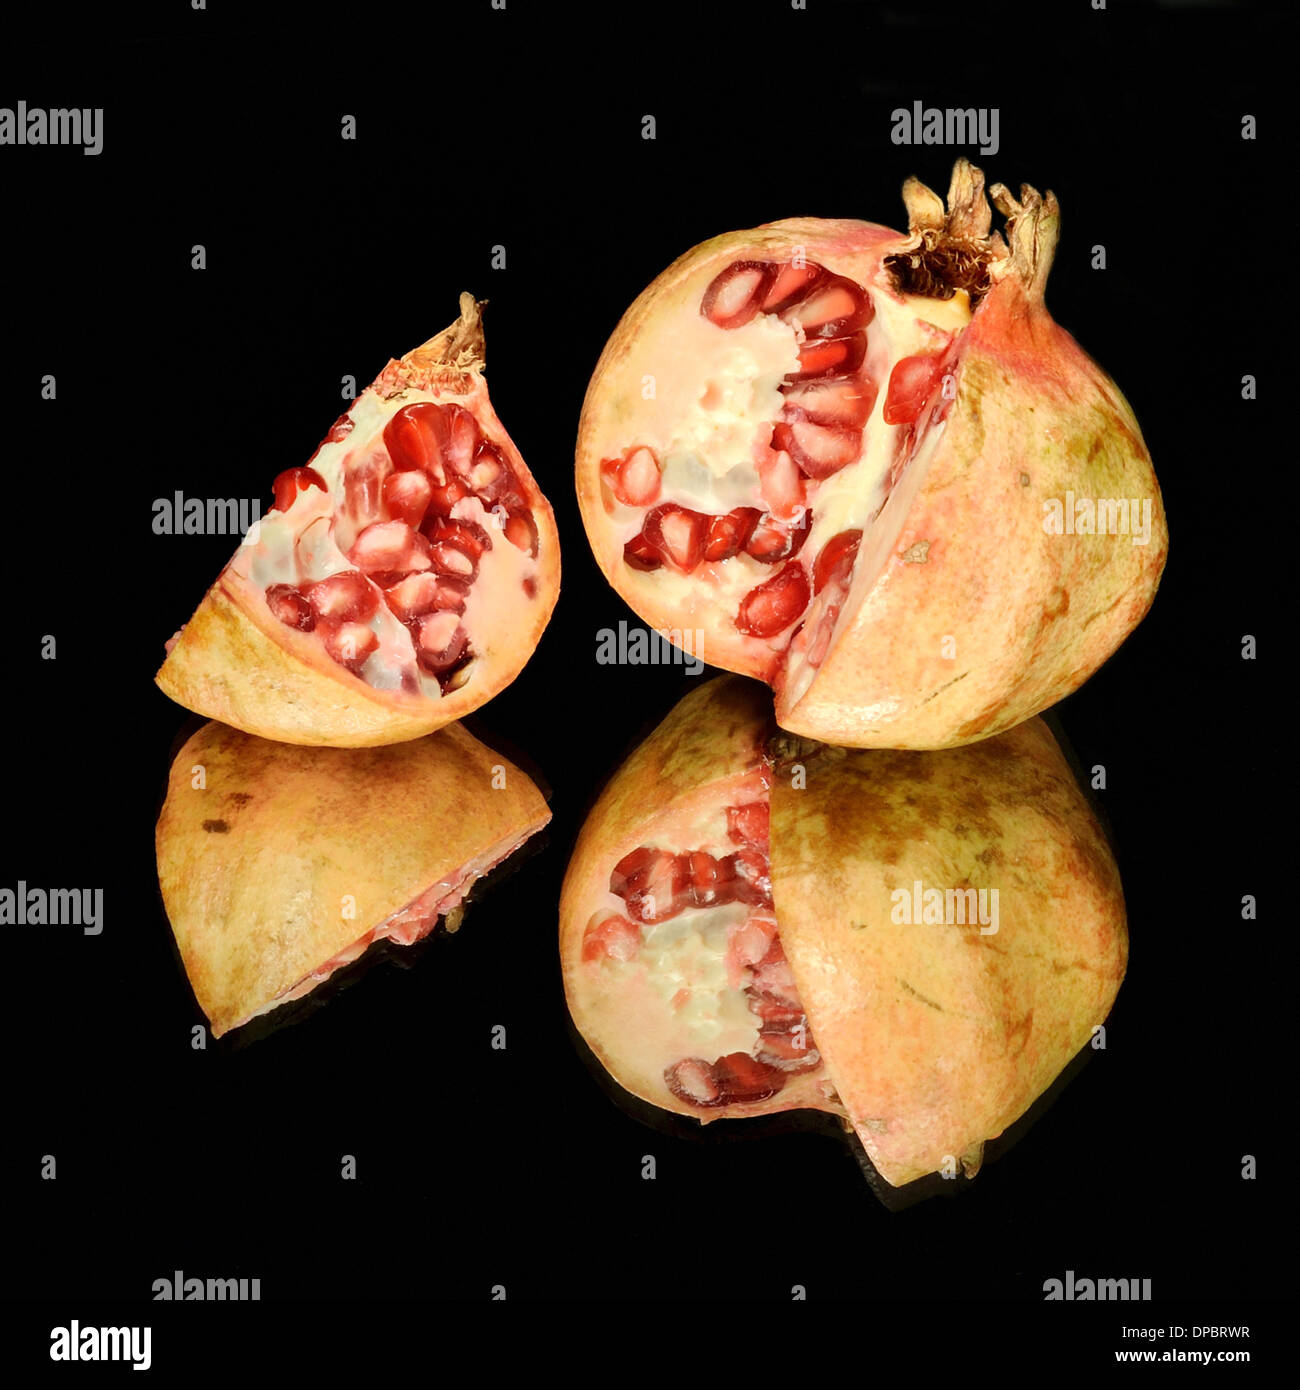 Pomegranate cut on mirror with black background. Stock Photo